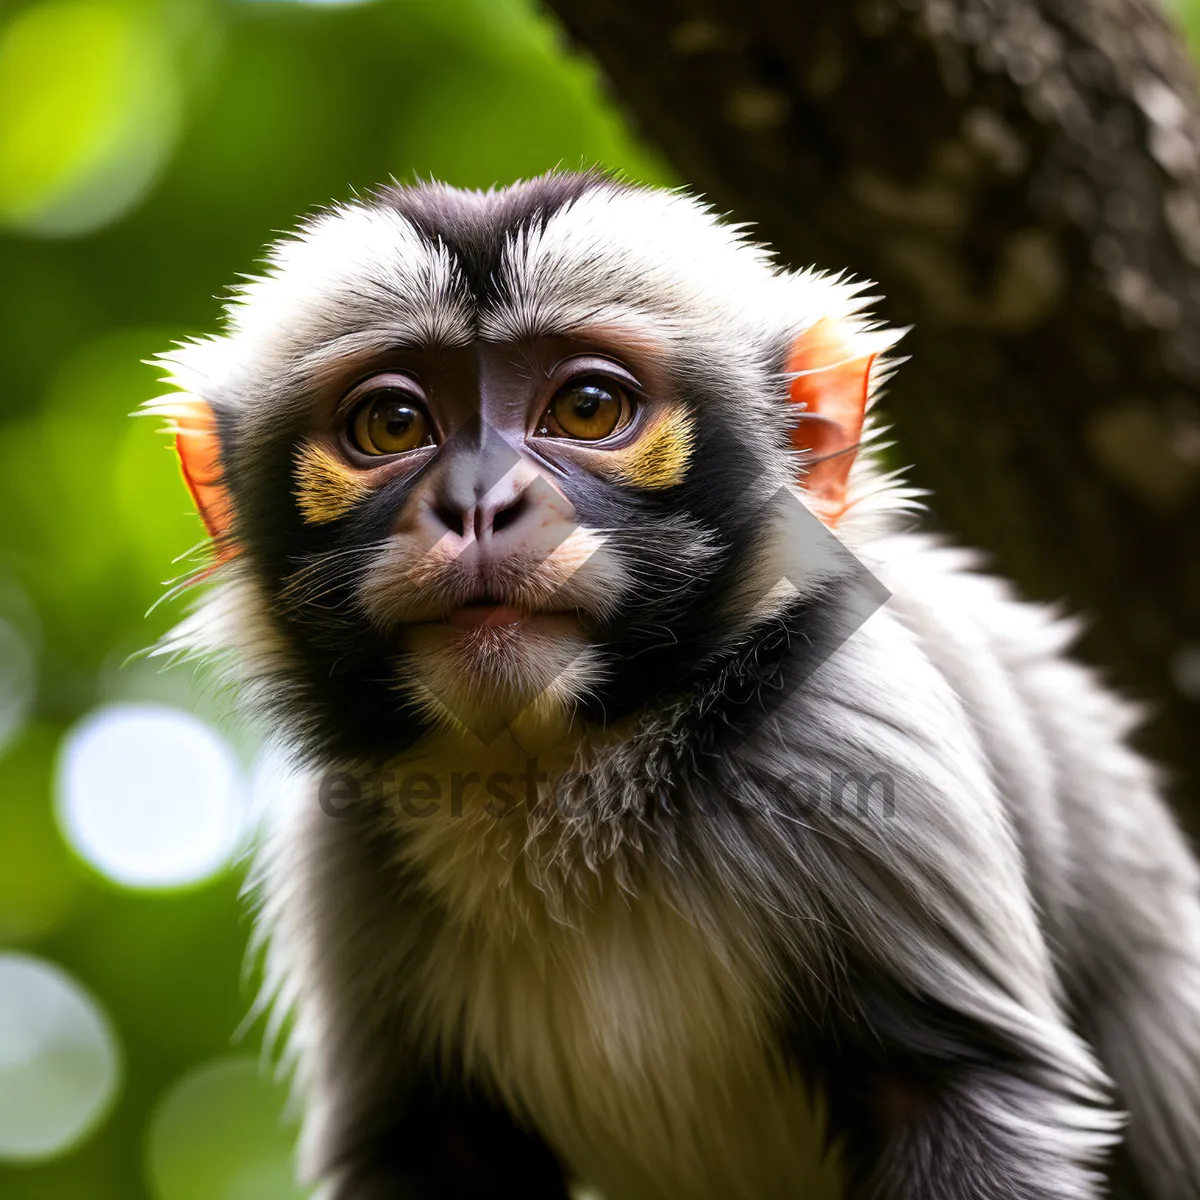 Picture of Adorable Primate with Expressive Face in the Zoo